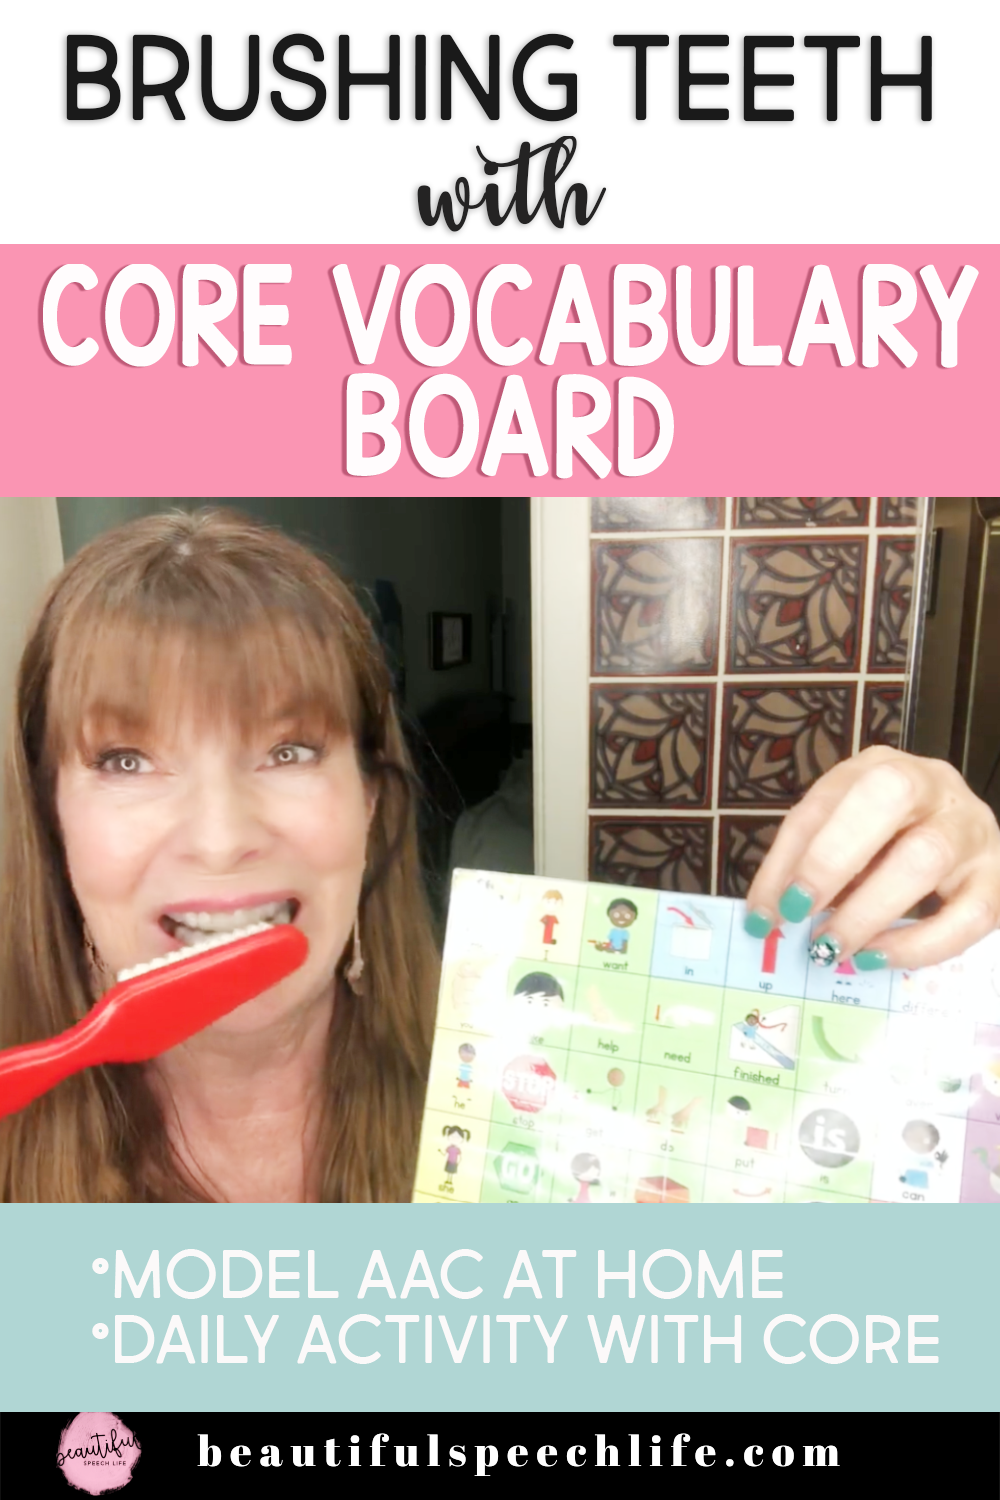 Brush your teeth with a core vocabulary board